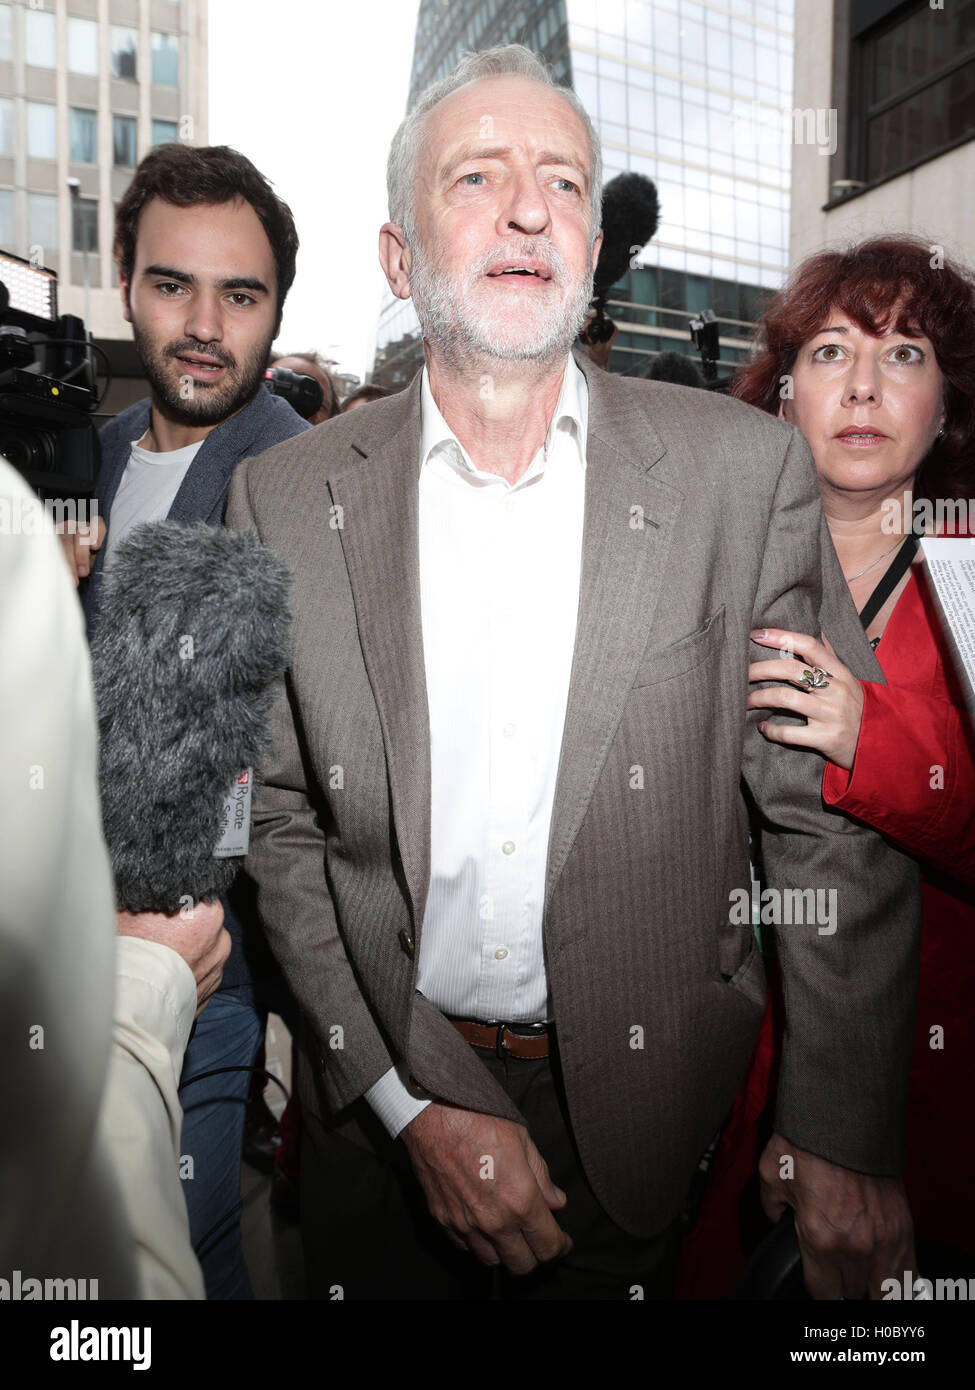 Labour Party leader Jeremy Corbyn arrives at Labour Party HQ in Westminster, London, where the party's ruling National Executive Committee is meeting to discuss moves to restore party unity amid warnings of an early general election in which leadership contender Owen Smith has predicted they could be 'decimated'. Stock Photo